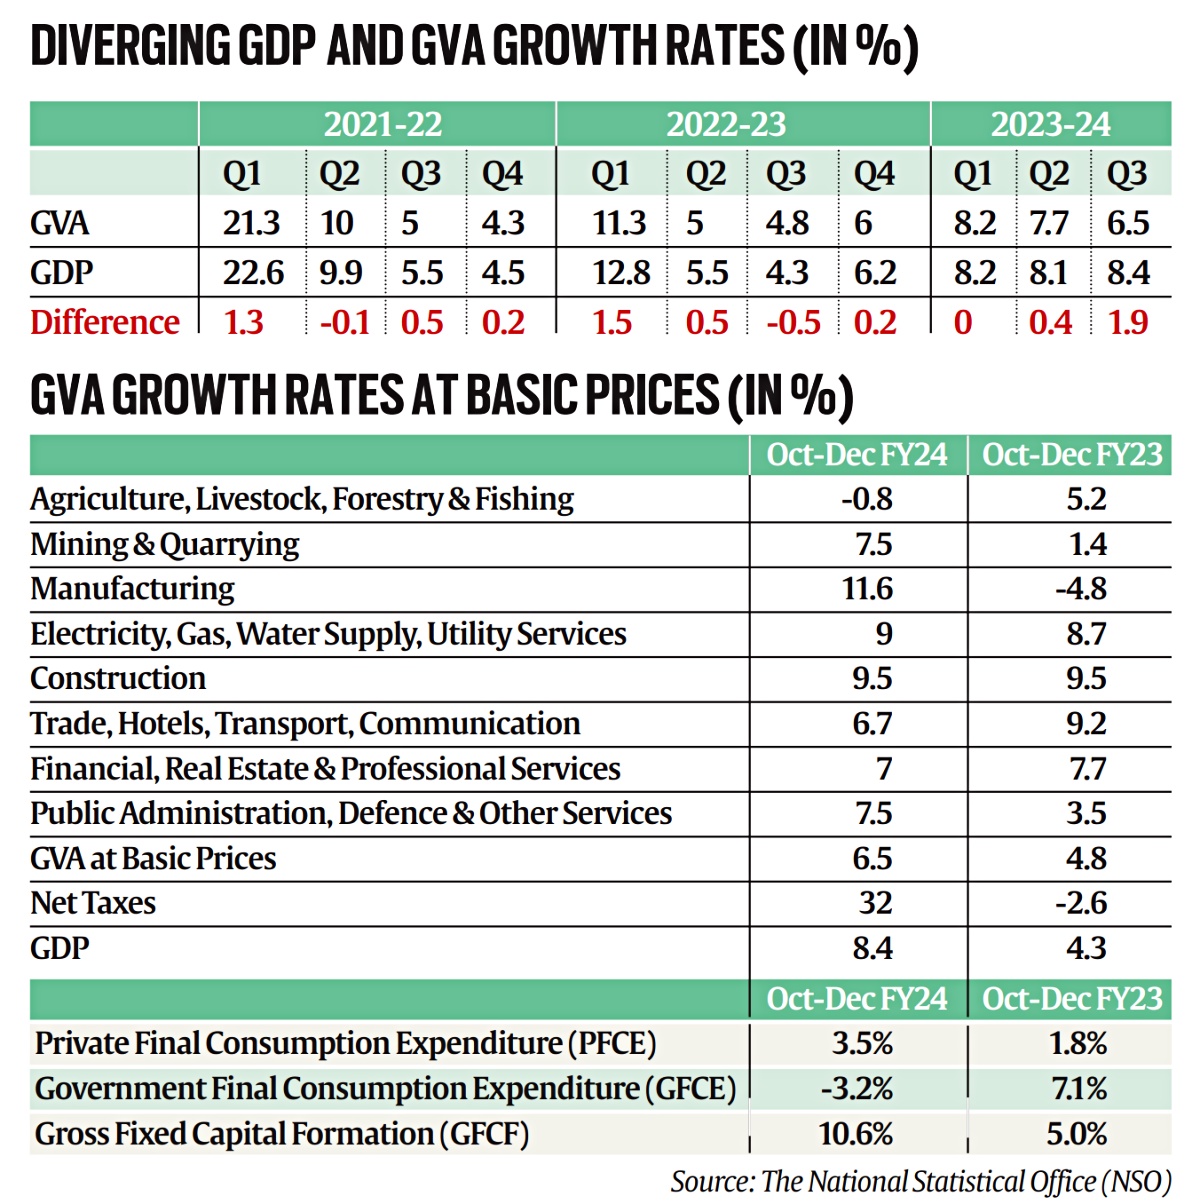 India's gdp data, its divergence from GVA.